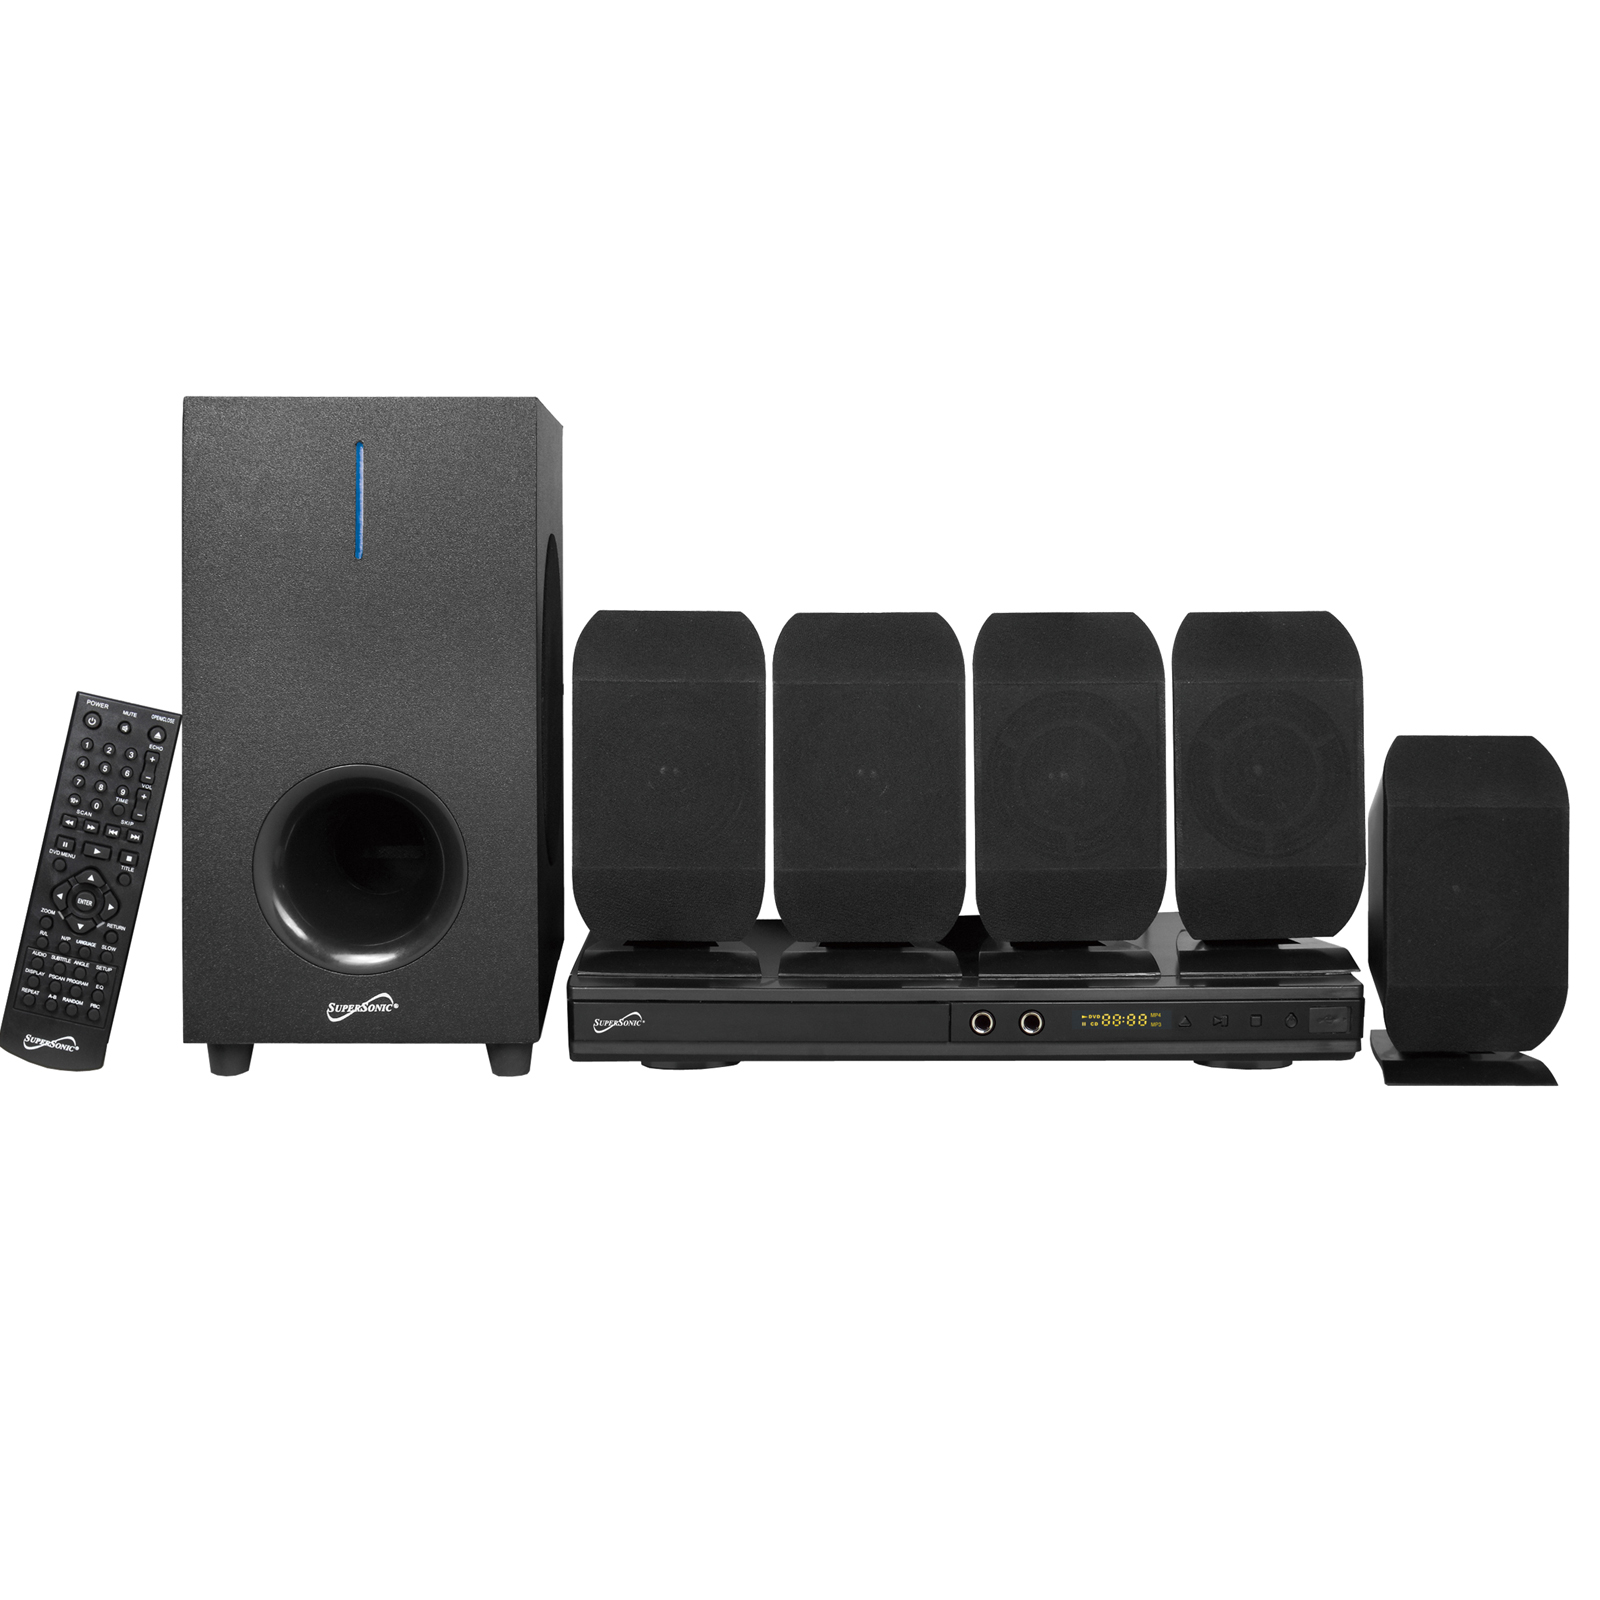 Supersonic 97095079M 5.1 Channel DVD Home Theater System with USB Input and Karaoke Function - Black